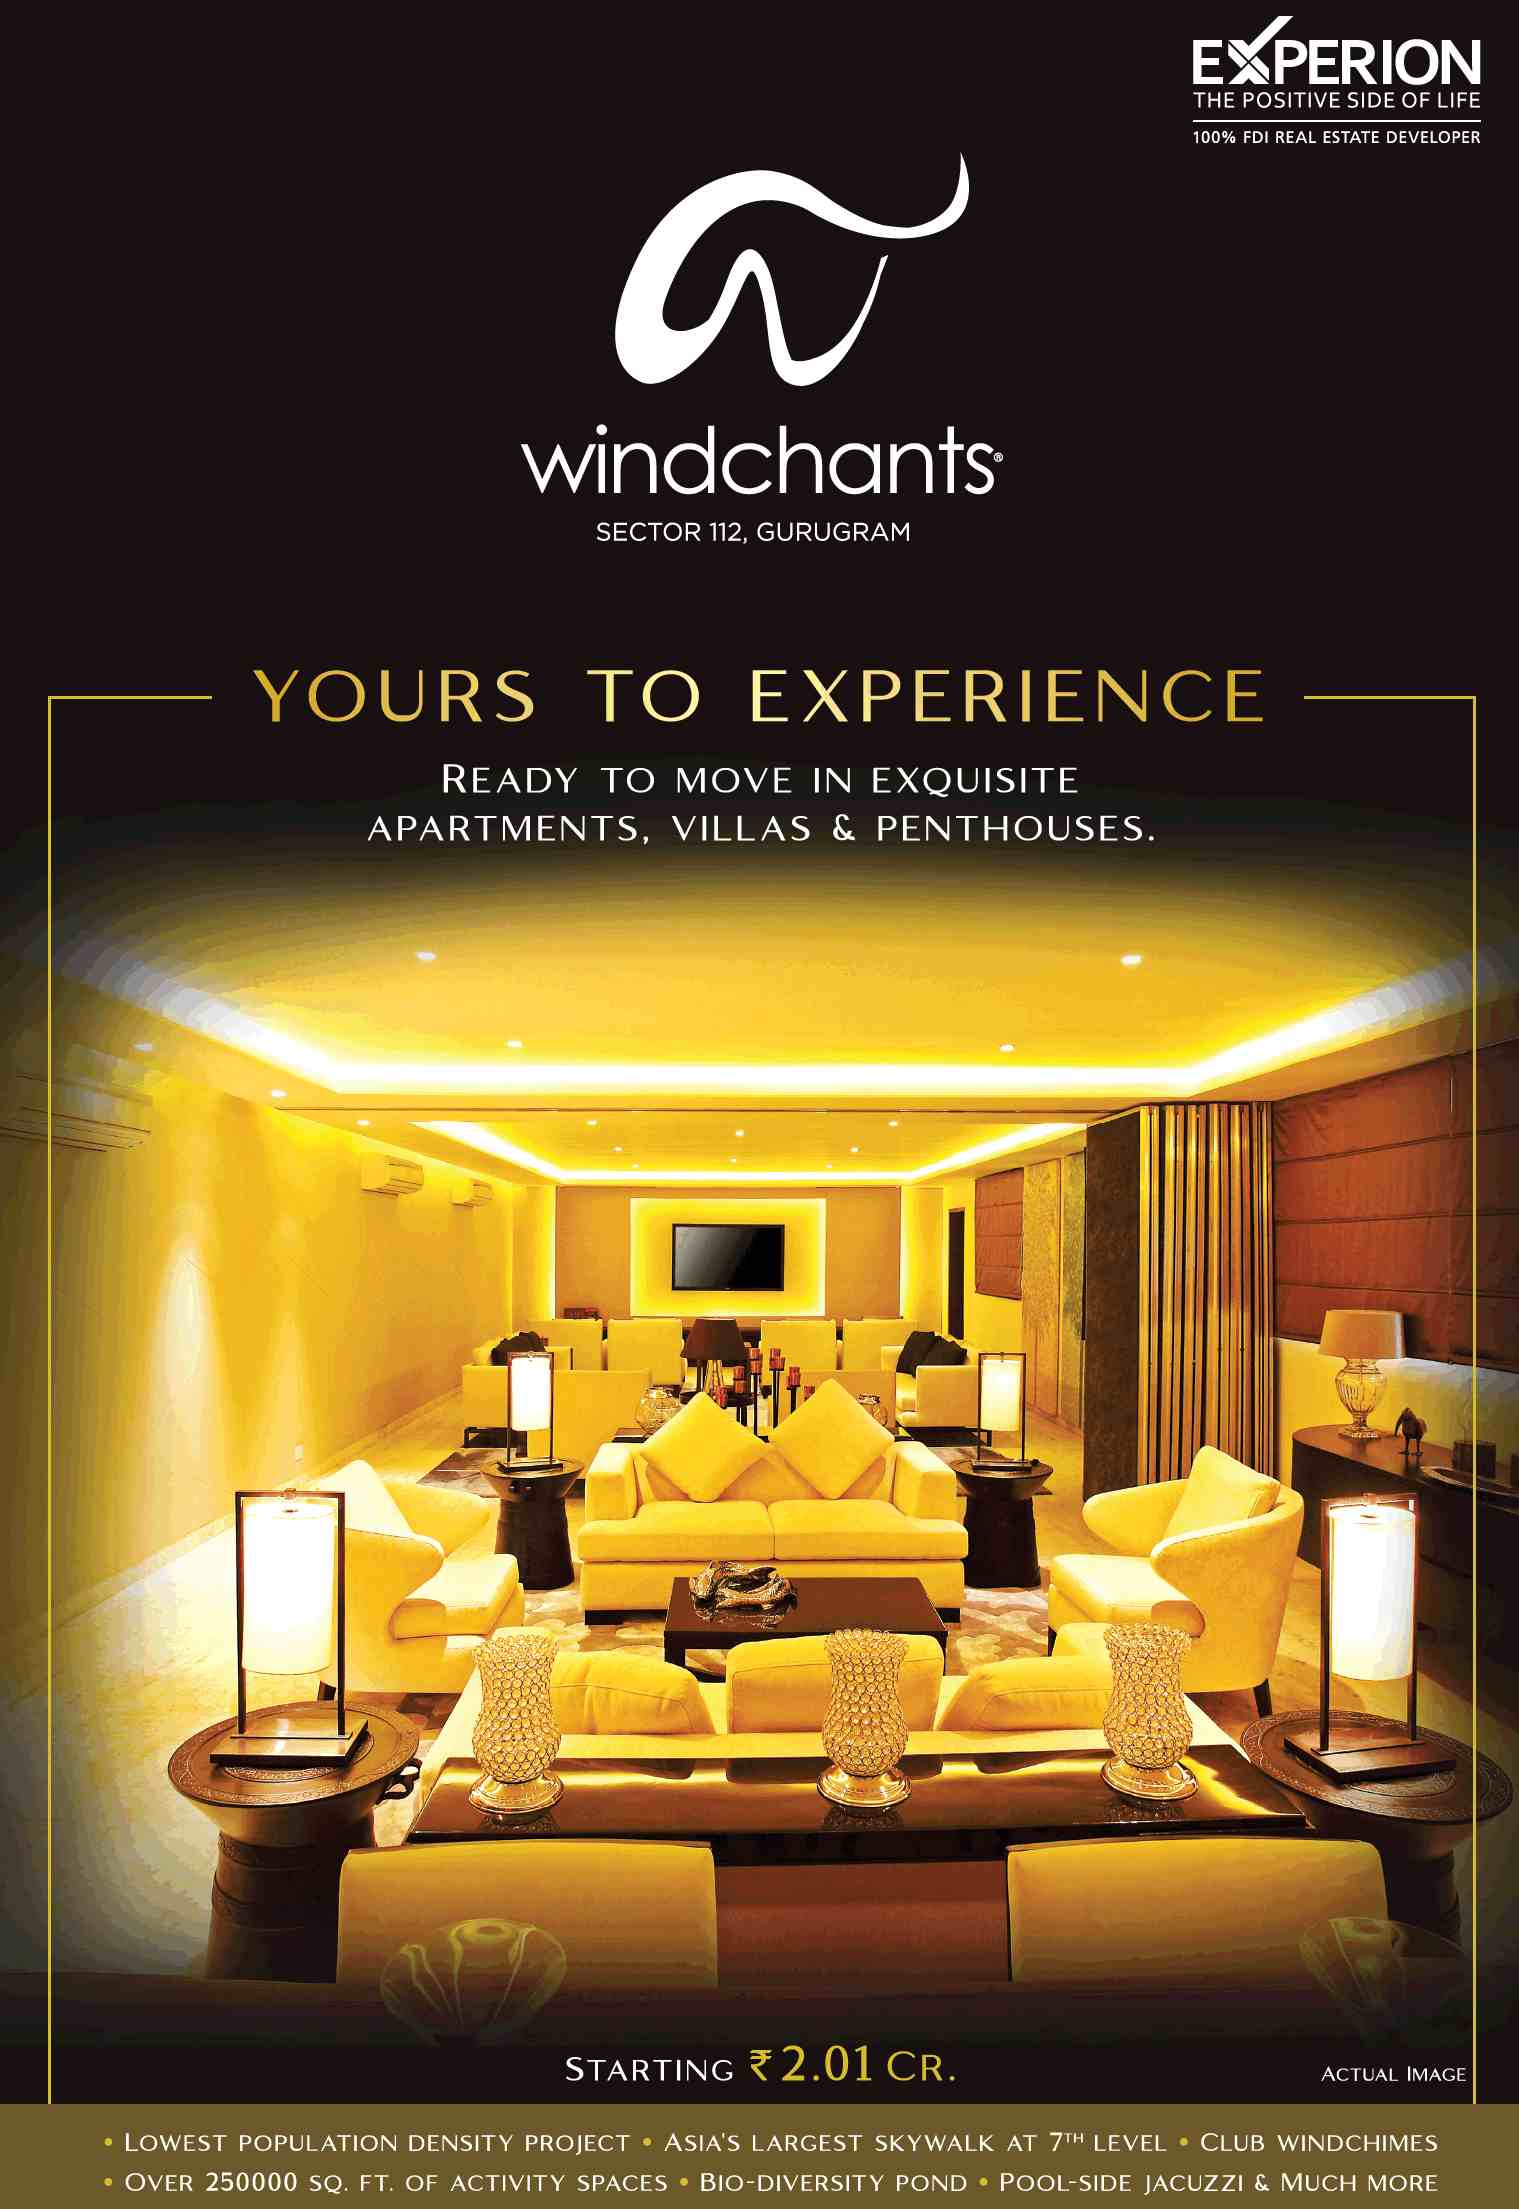 Book ready to move exquisite apartments, villas & penthouses at Experion Windchants in Gurgaon